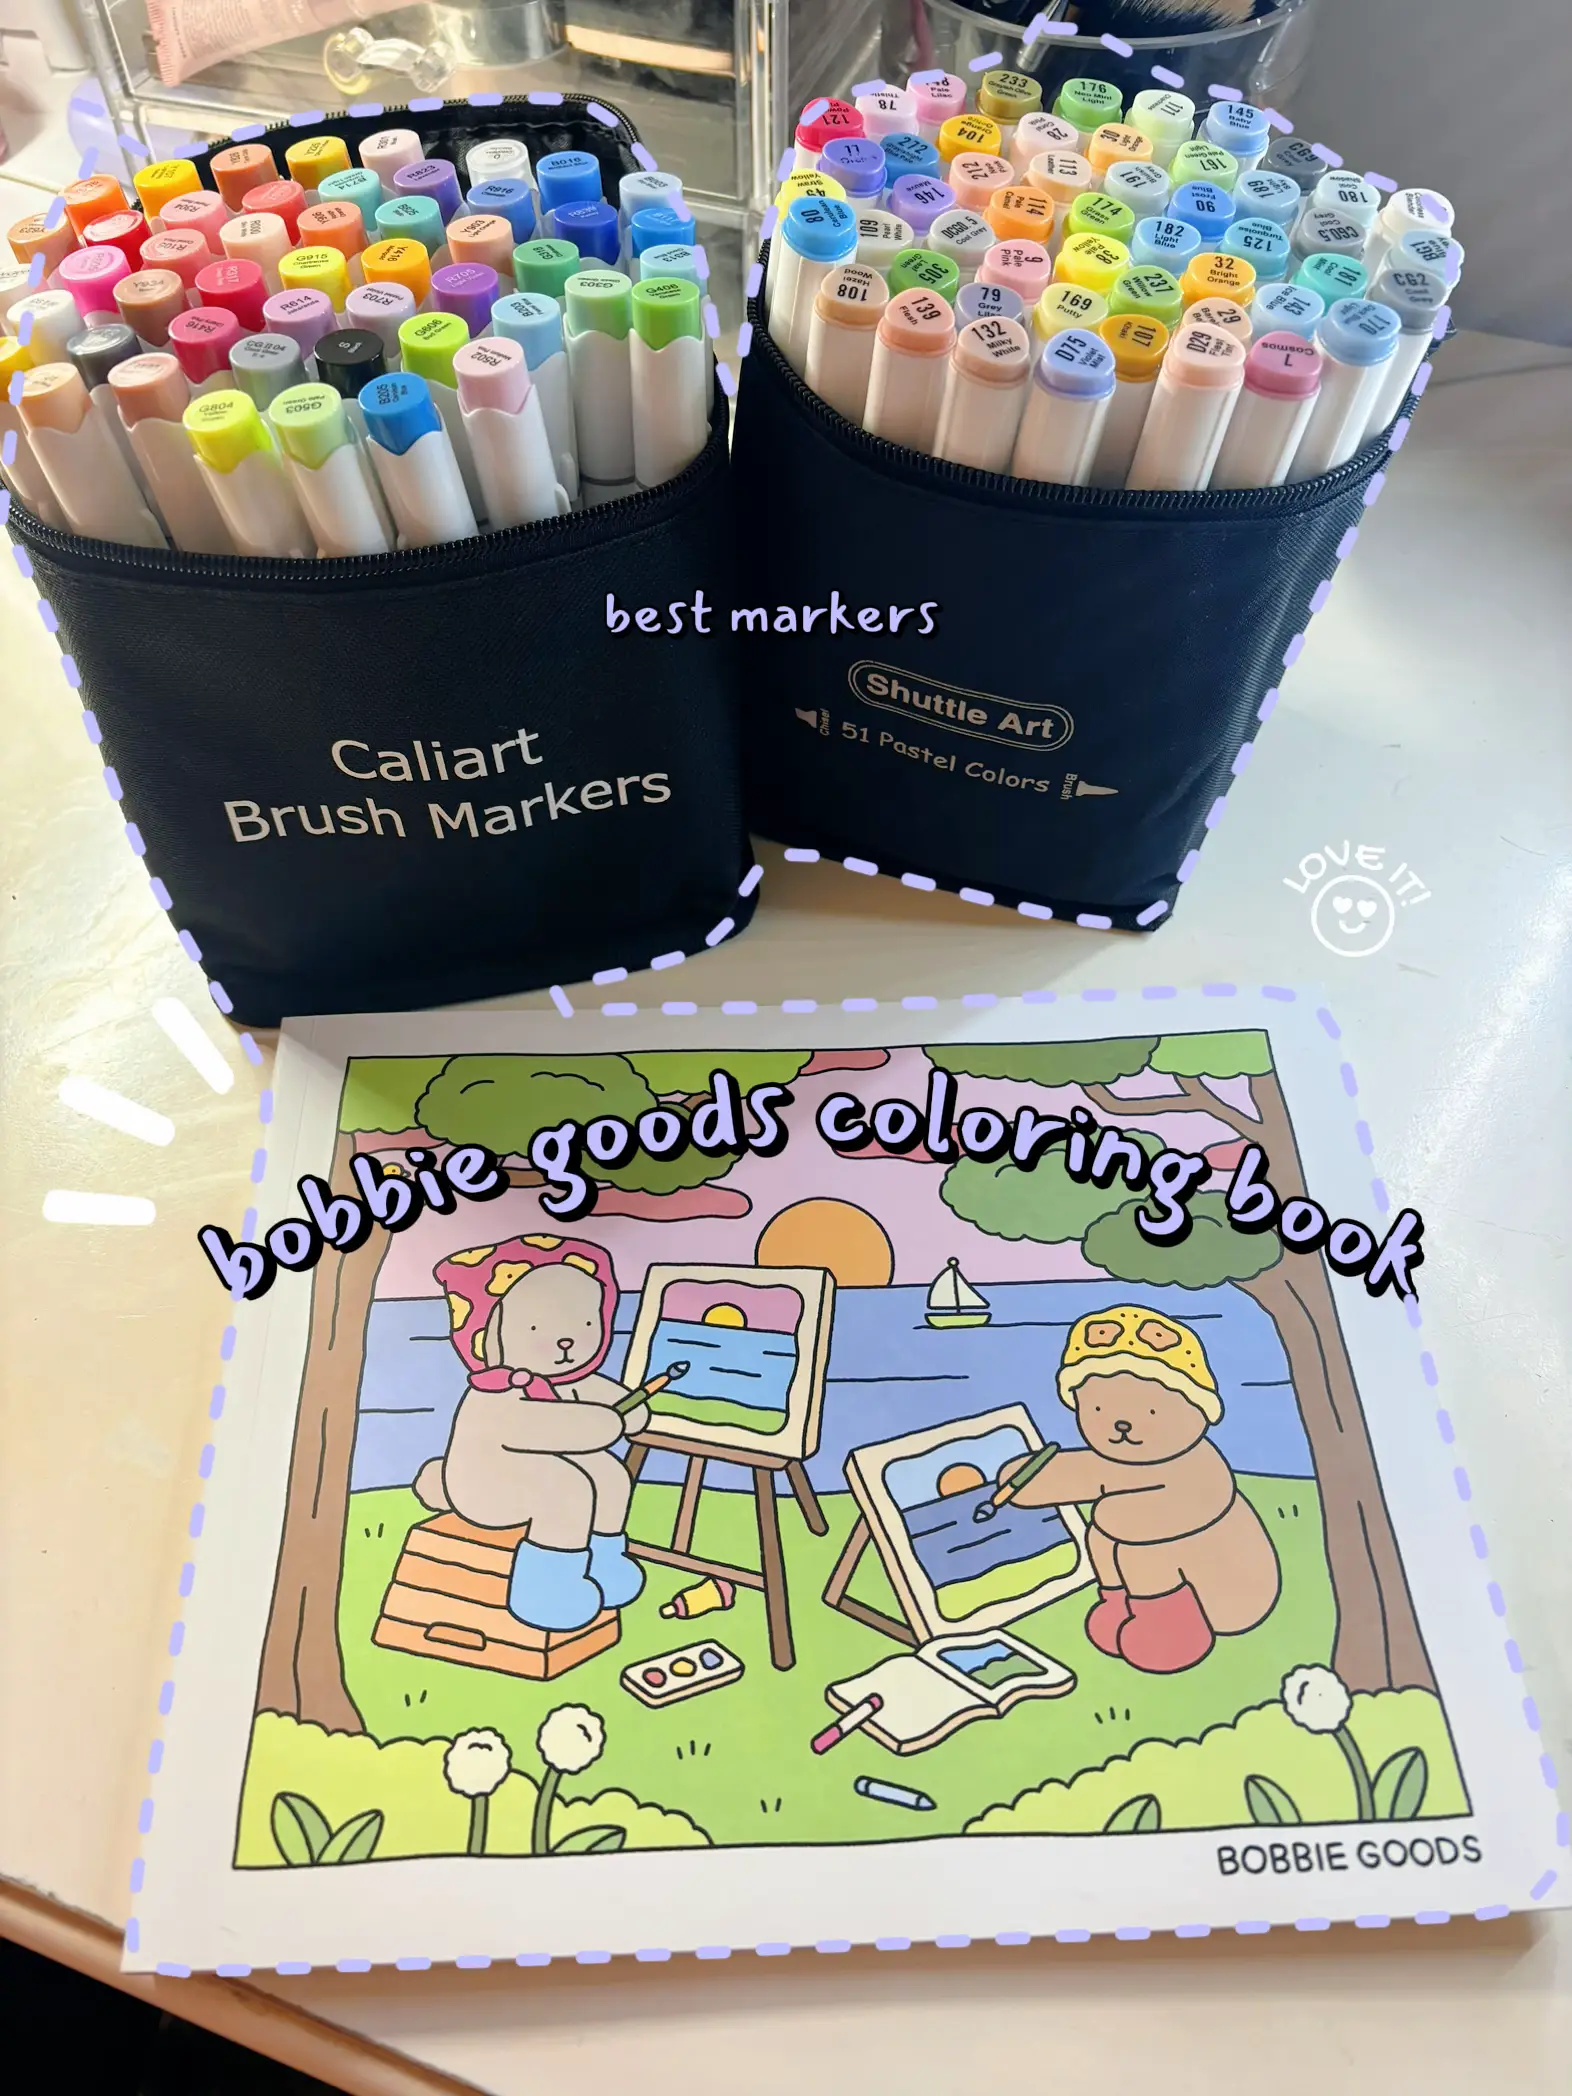 POV: You got your hands on the Bobbie Goods Coloring Book